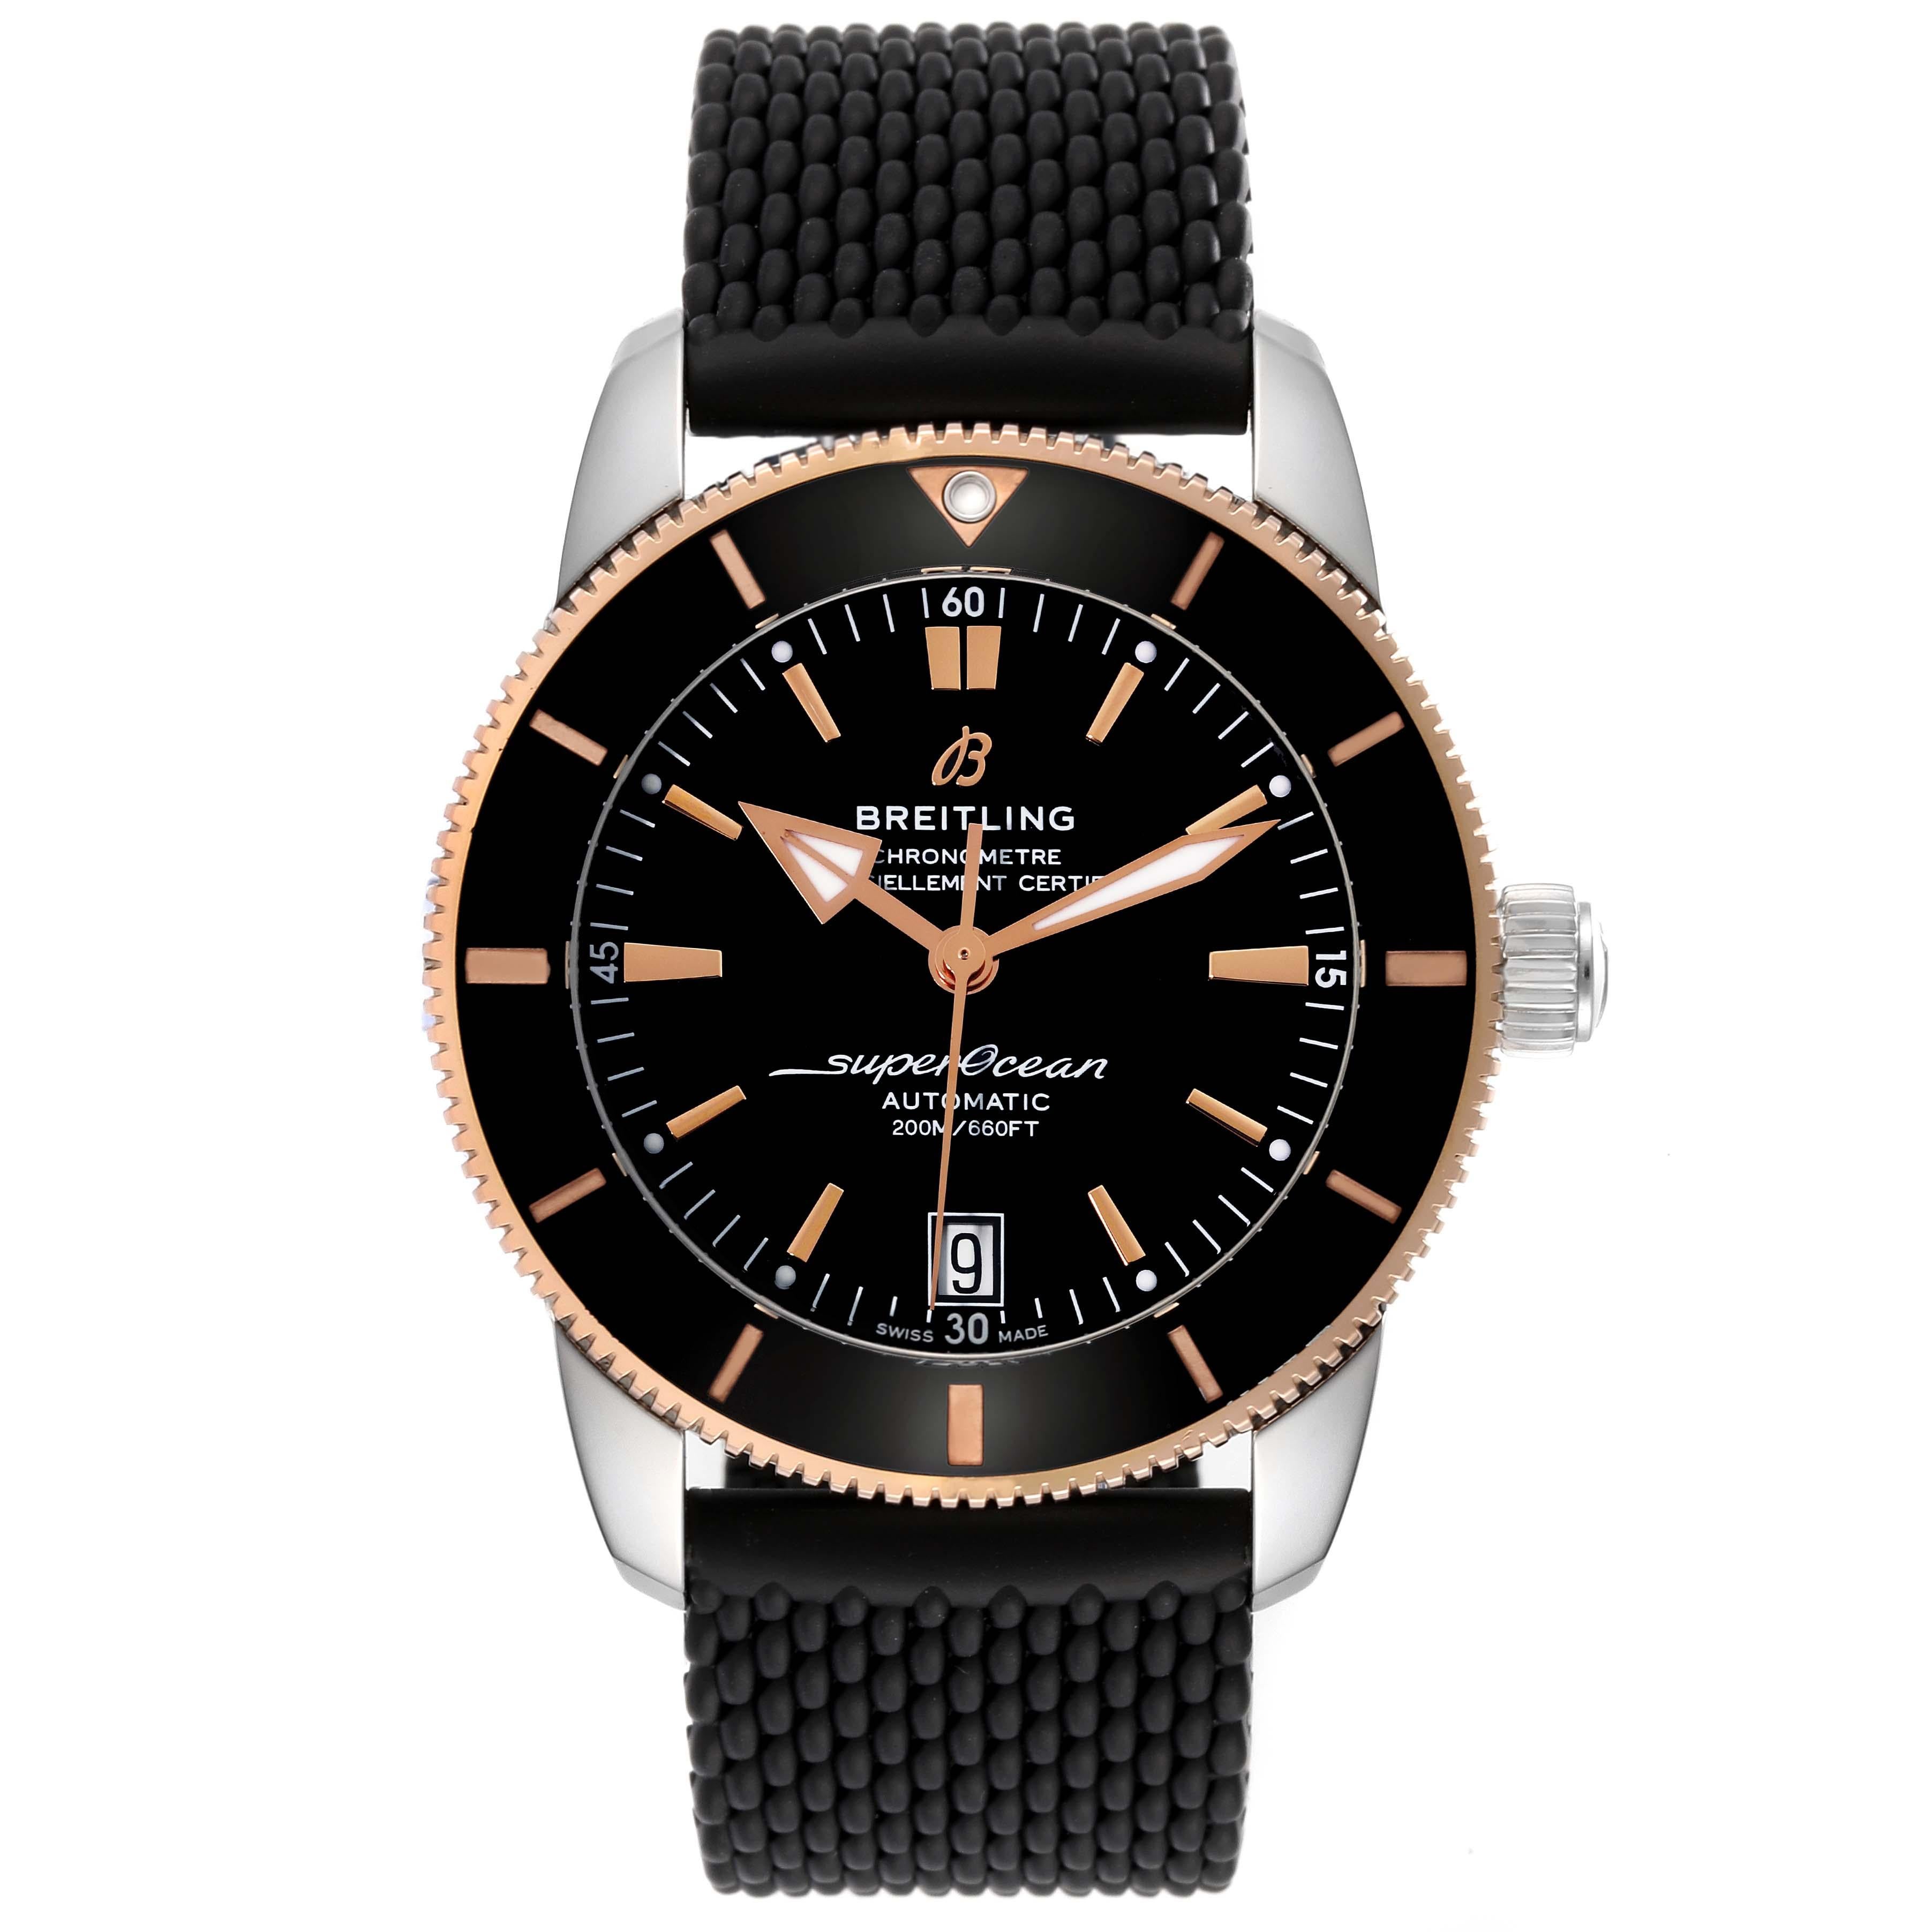 Breitling Superocean Heritage II 42 Steel Rose Gold Mens Watch UB2010 Box Card. Automatic self-winding B20 movement. Stainless steel case 42.0 mm in diameter. Stainless steel screwed-down crown. Solid 18k rose gold bezel with black ceramic bezel